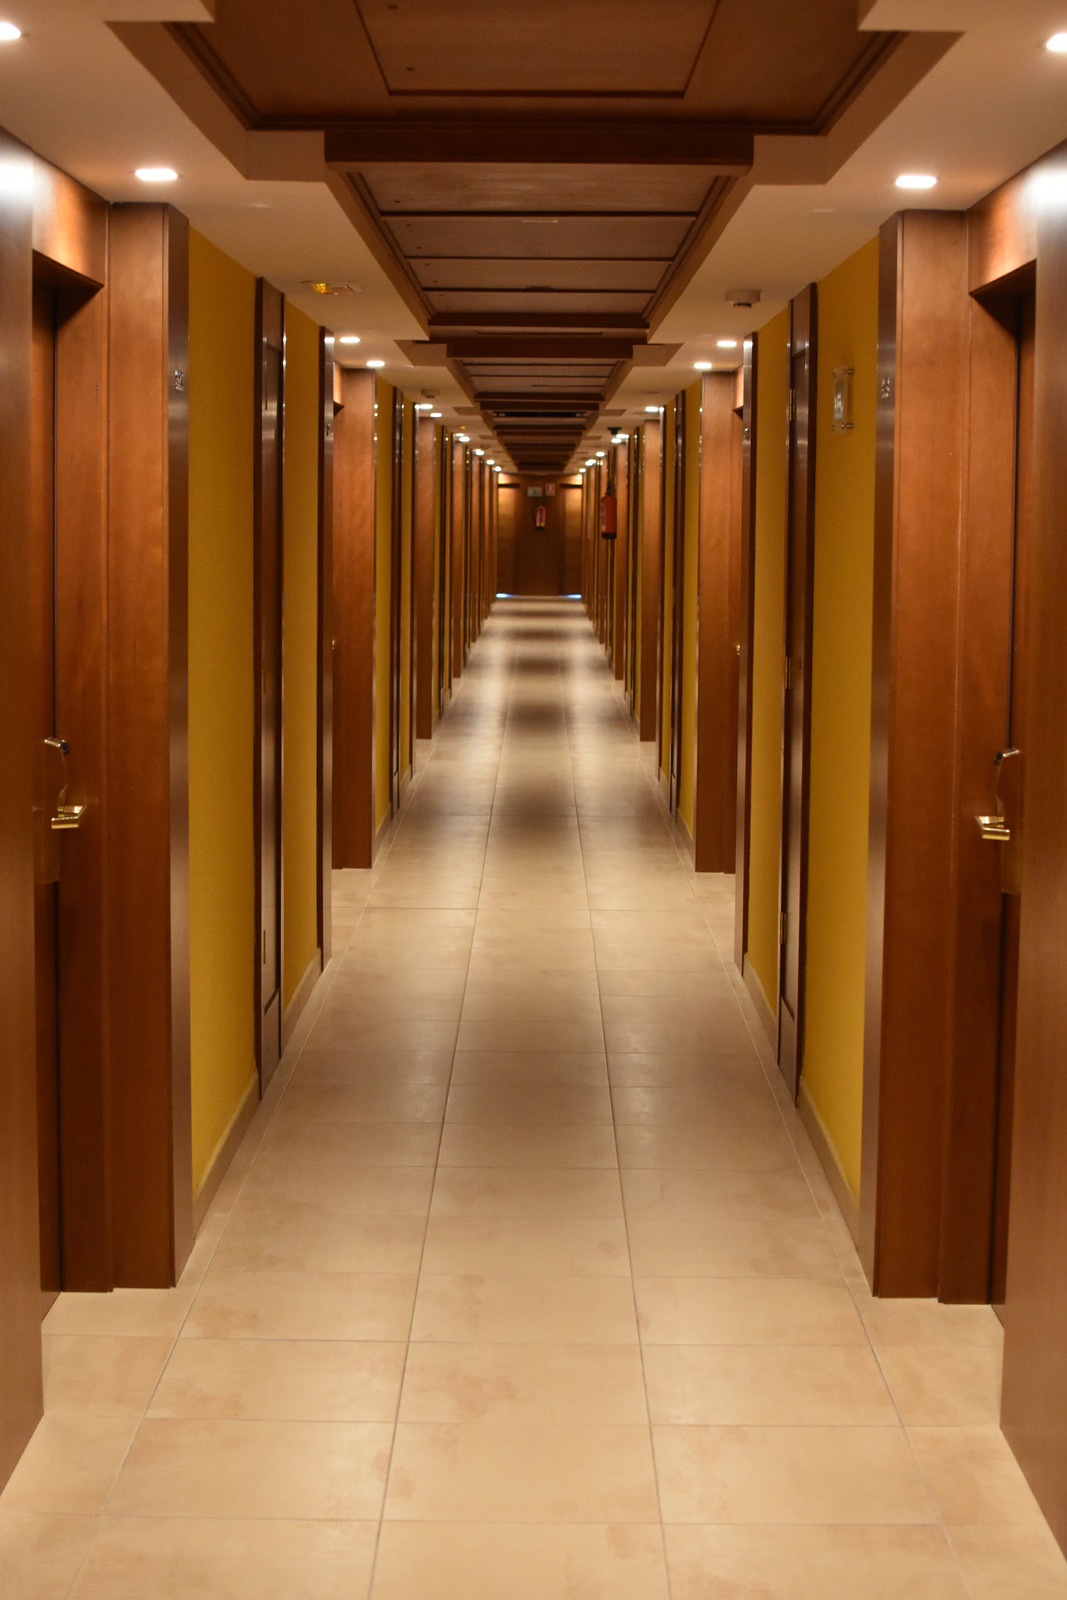 Turned On Lights Along Hotel Hallway Photos By Canva